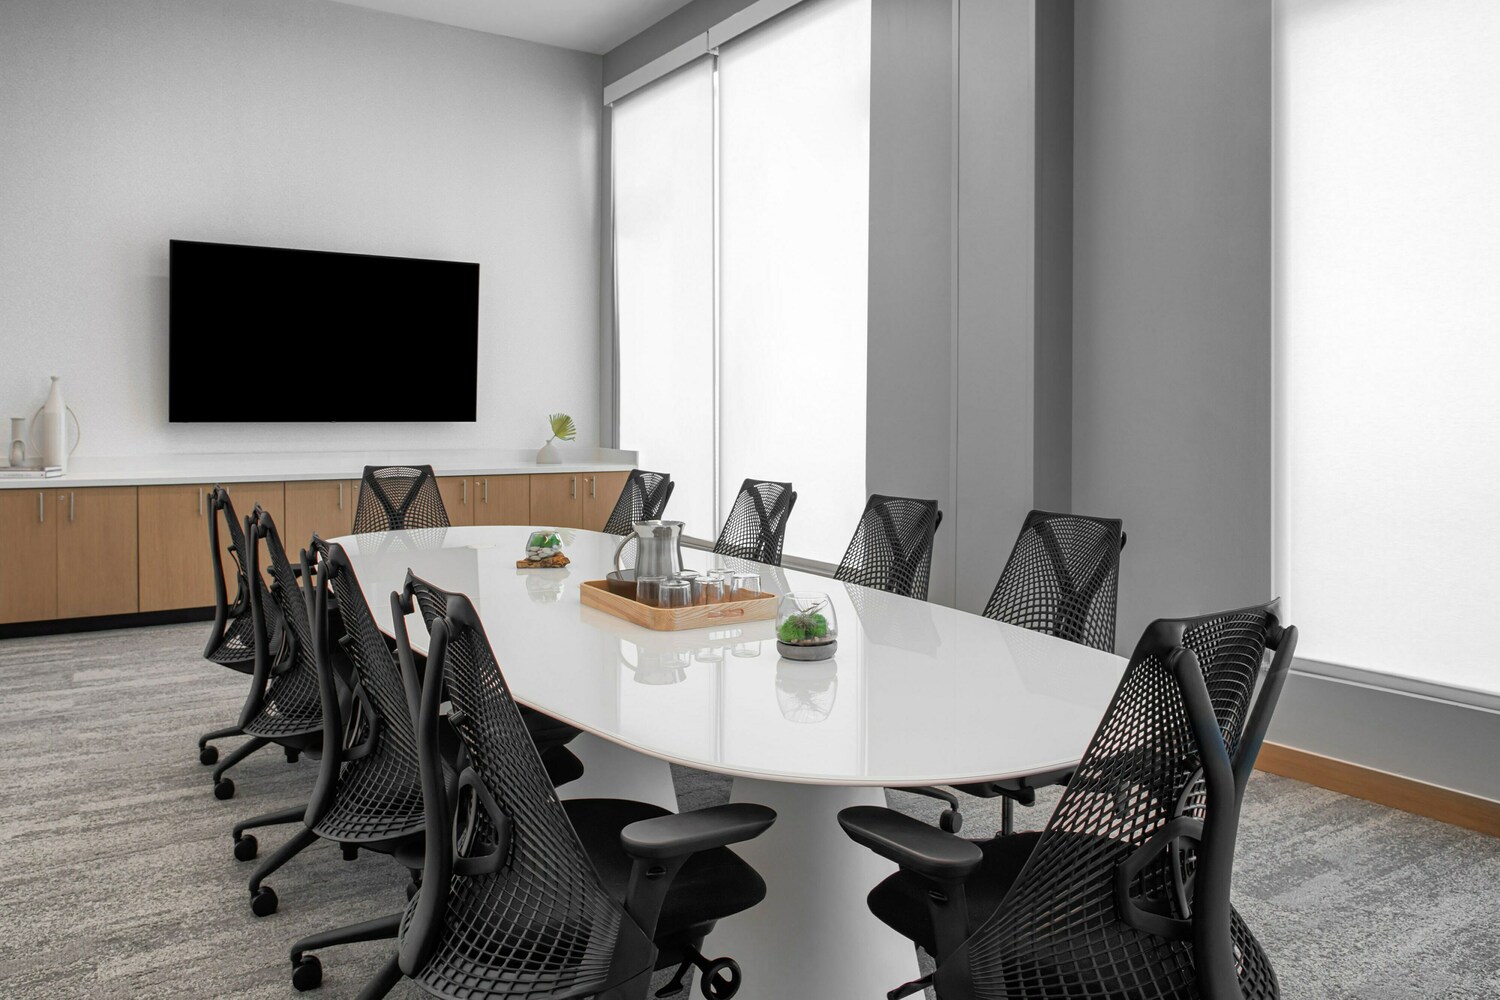 Hold your next small meeting in our Boardroom with 377 sq ft of space for up to 9 people. Ideal for small gatherings.